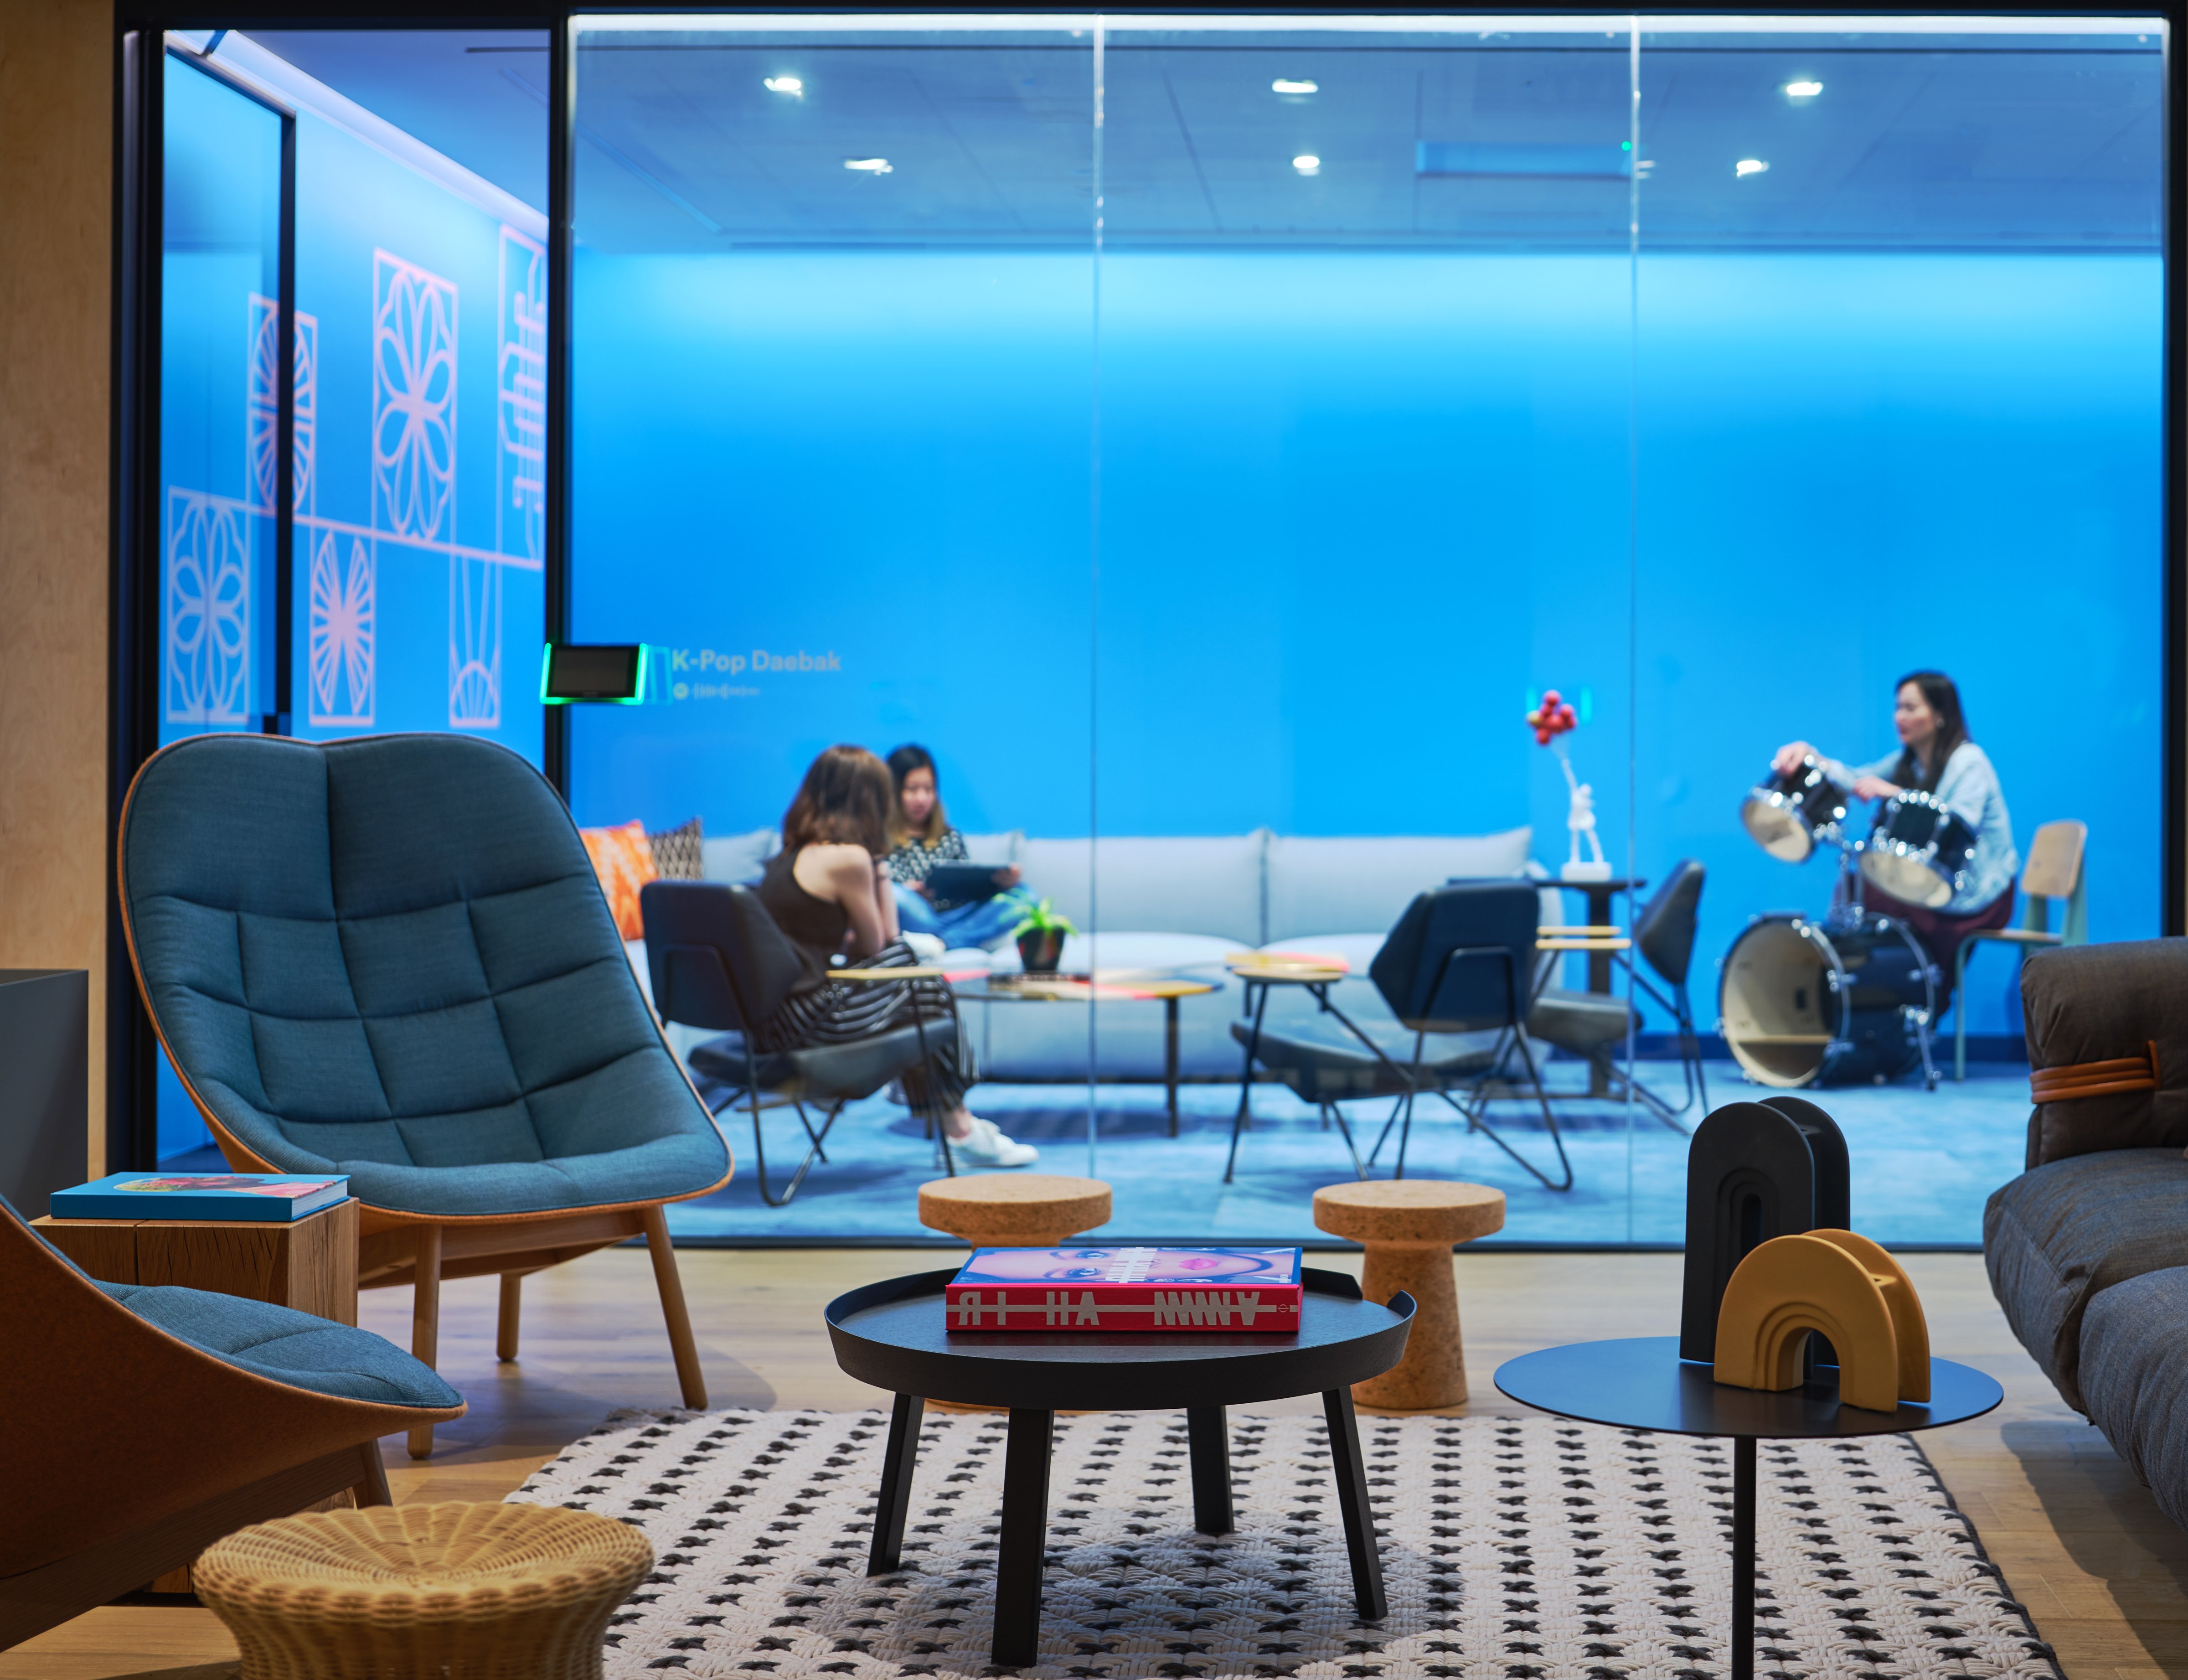 Spotify's Singapore offices could offer a glimpse into the future. (Spotify)